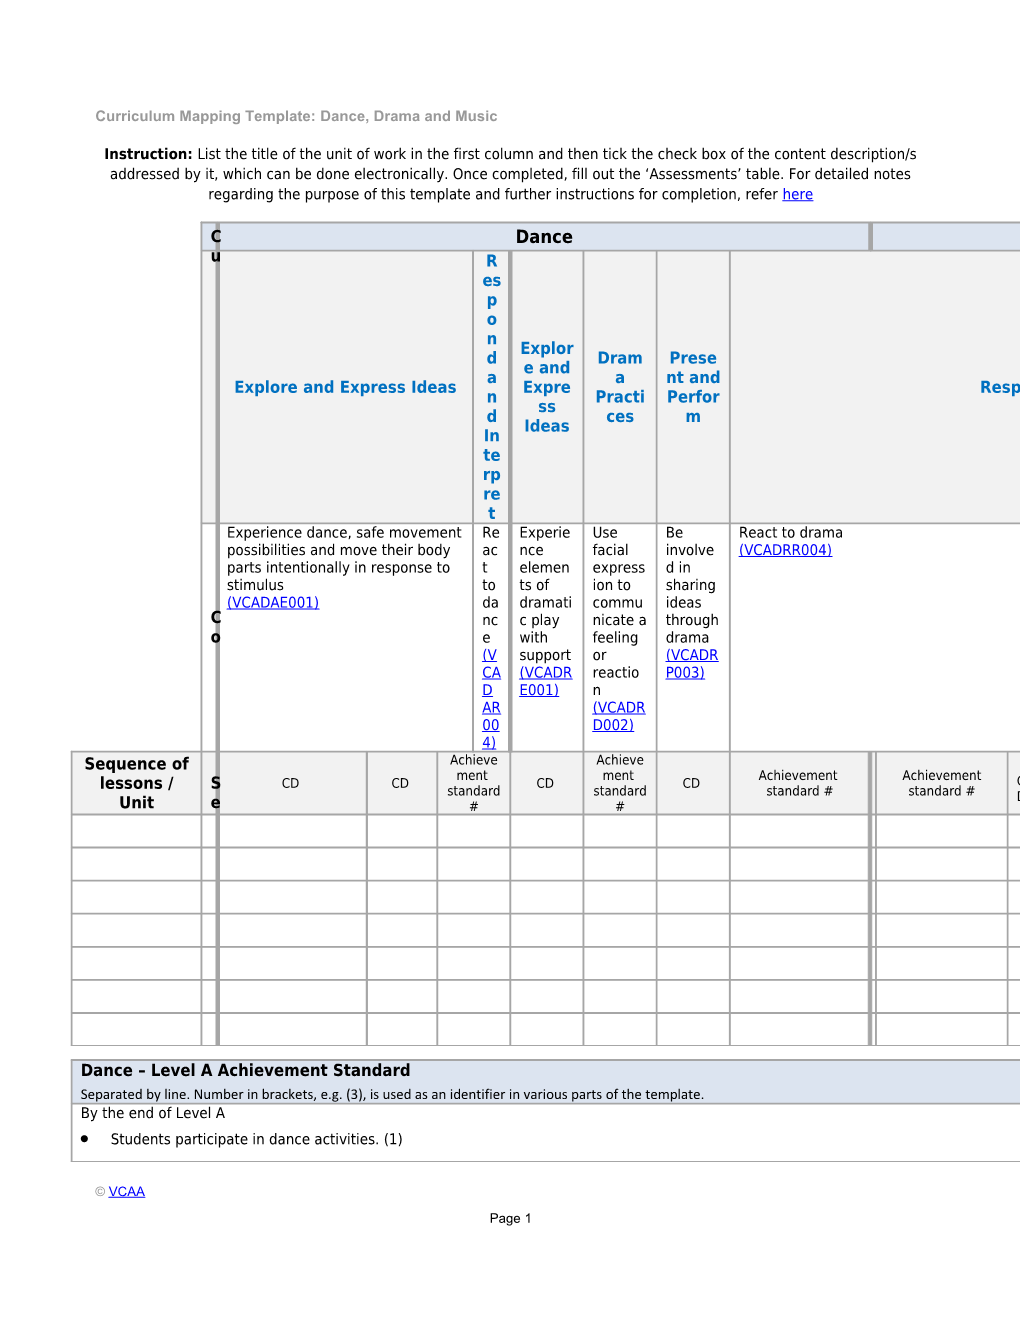 Curriculum Mapping Template: Dance, Drama and Music